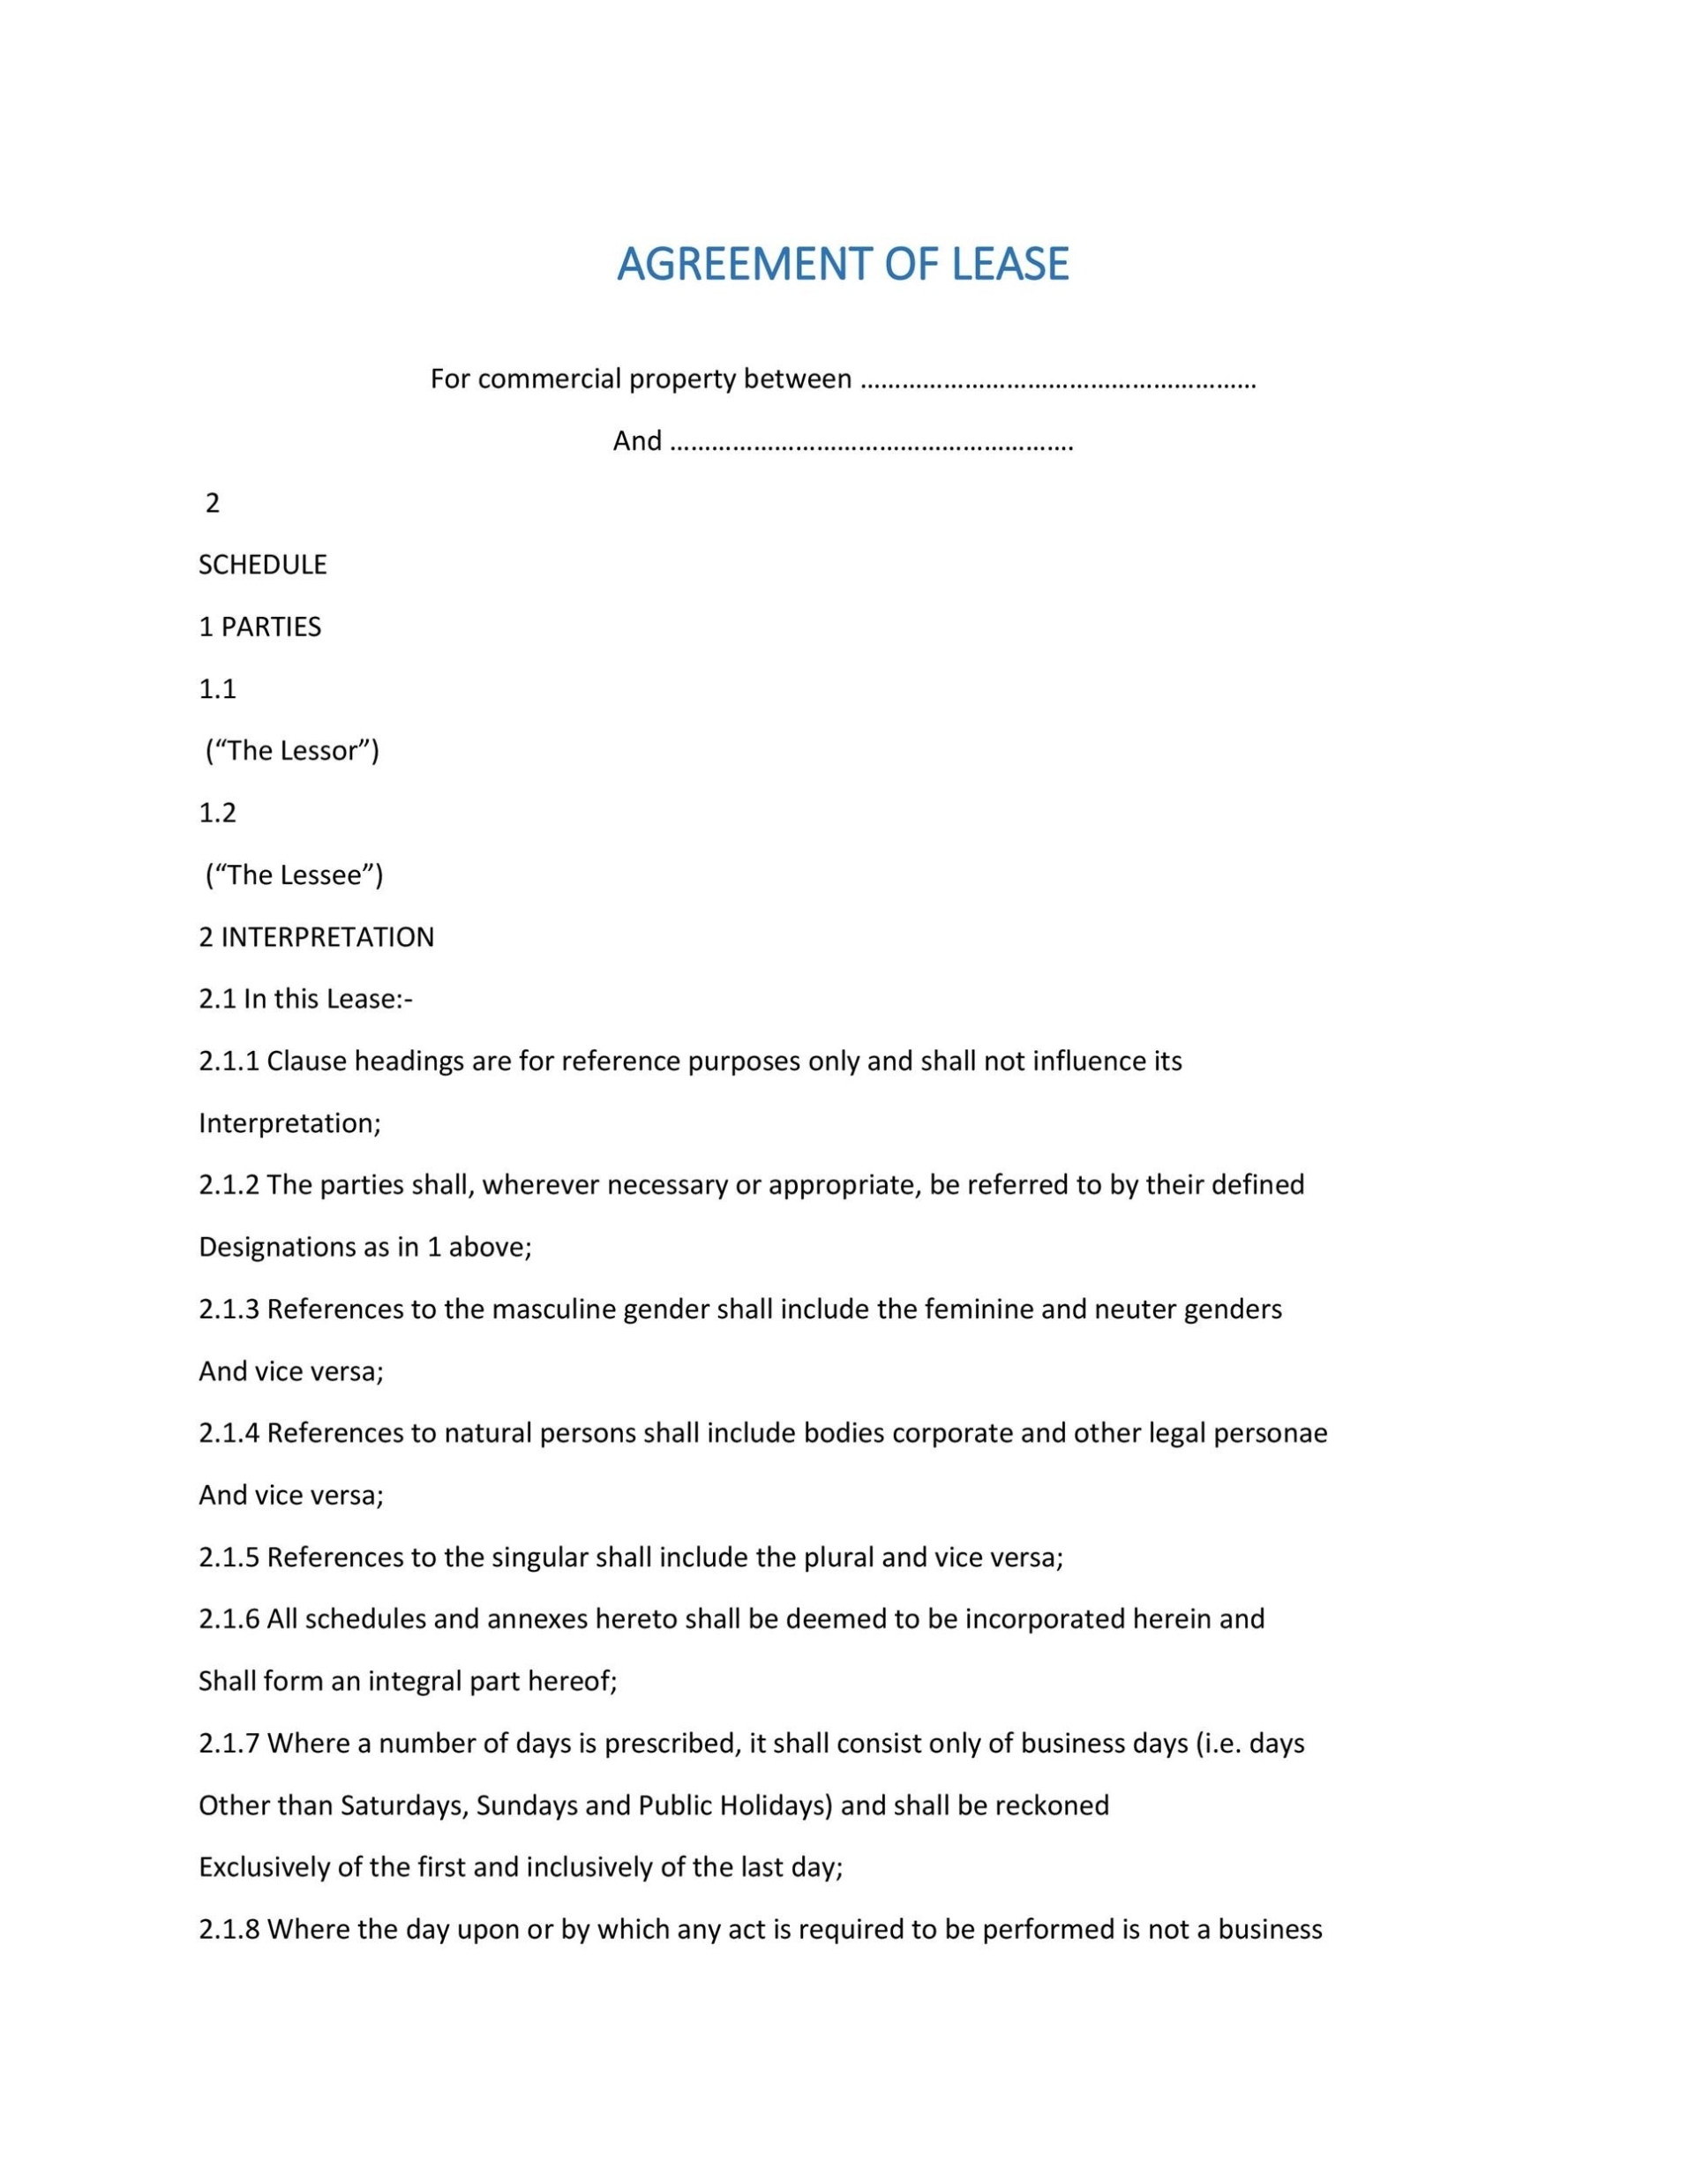 26 Free Commercial Lease Agreement Templates ᐅ Templatelab Within Business Lease Agreement Template Free